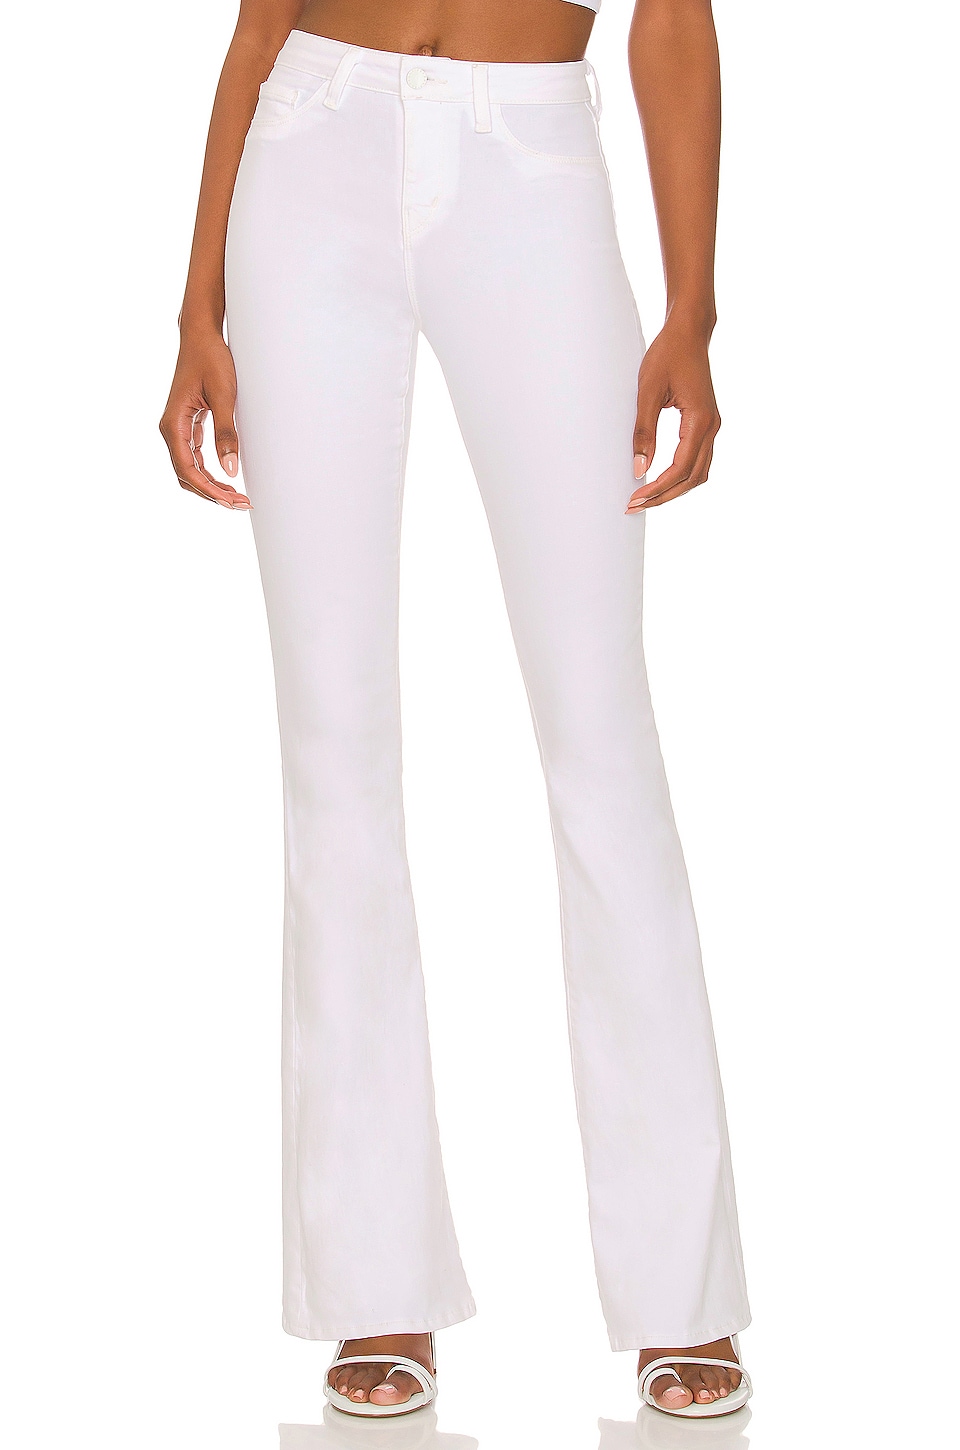 L'AGENCE Marty Ultra High Rise Flare in Blanc | REVOLVE